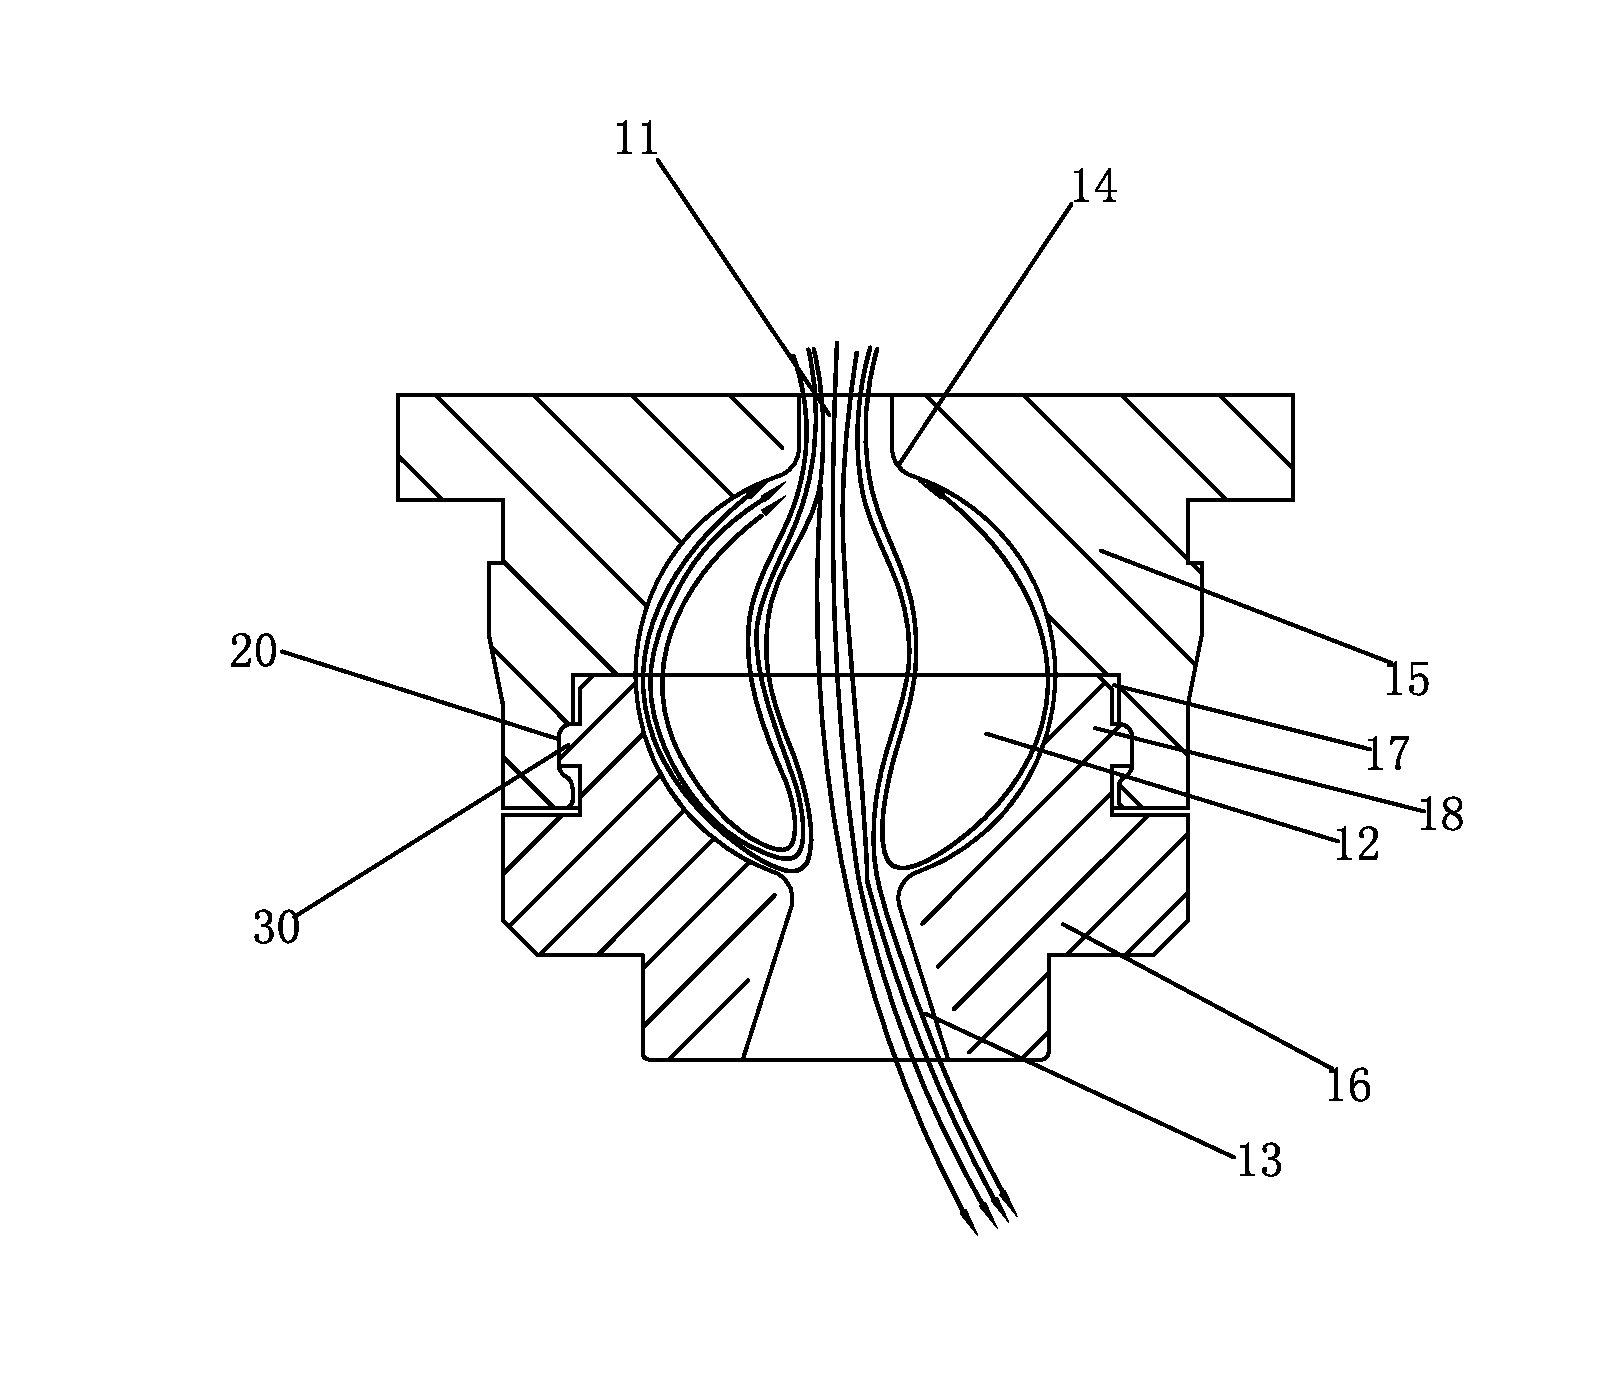 Showerhead with oscillating water